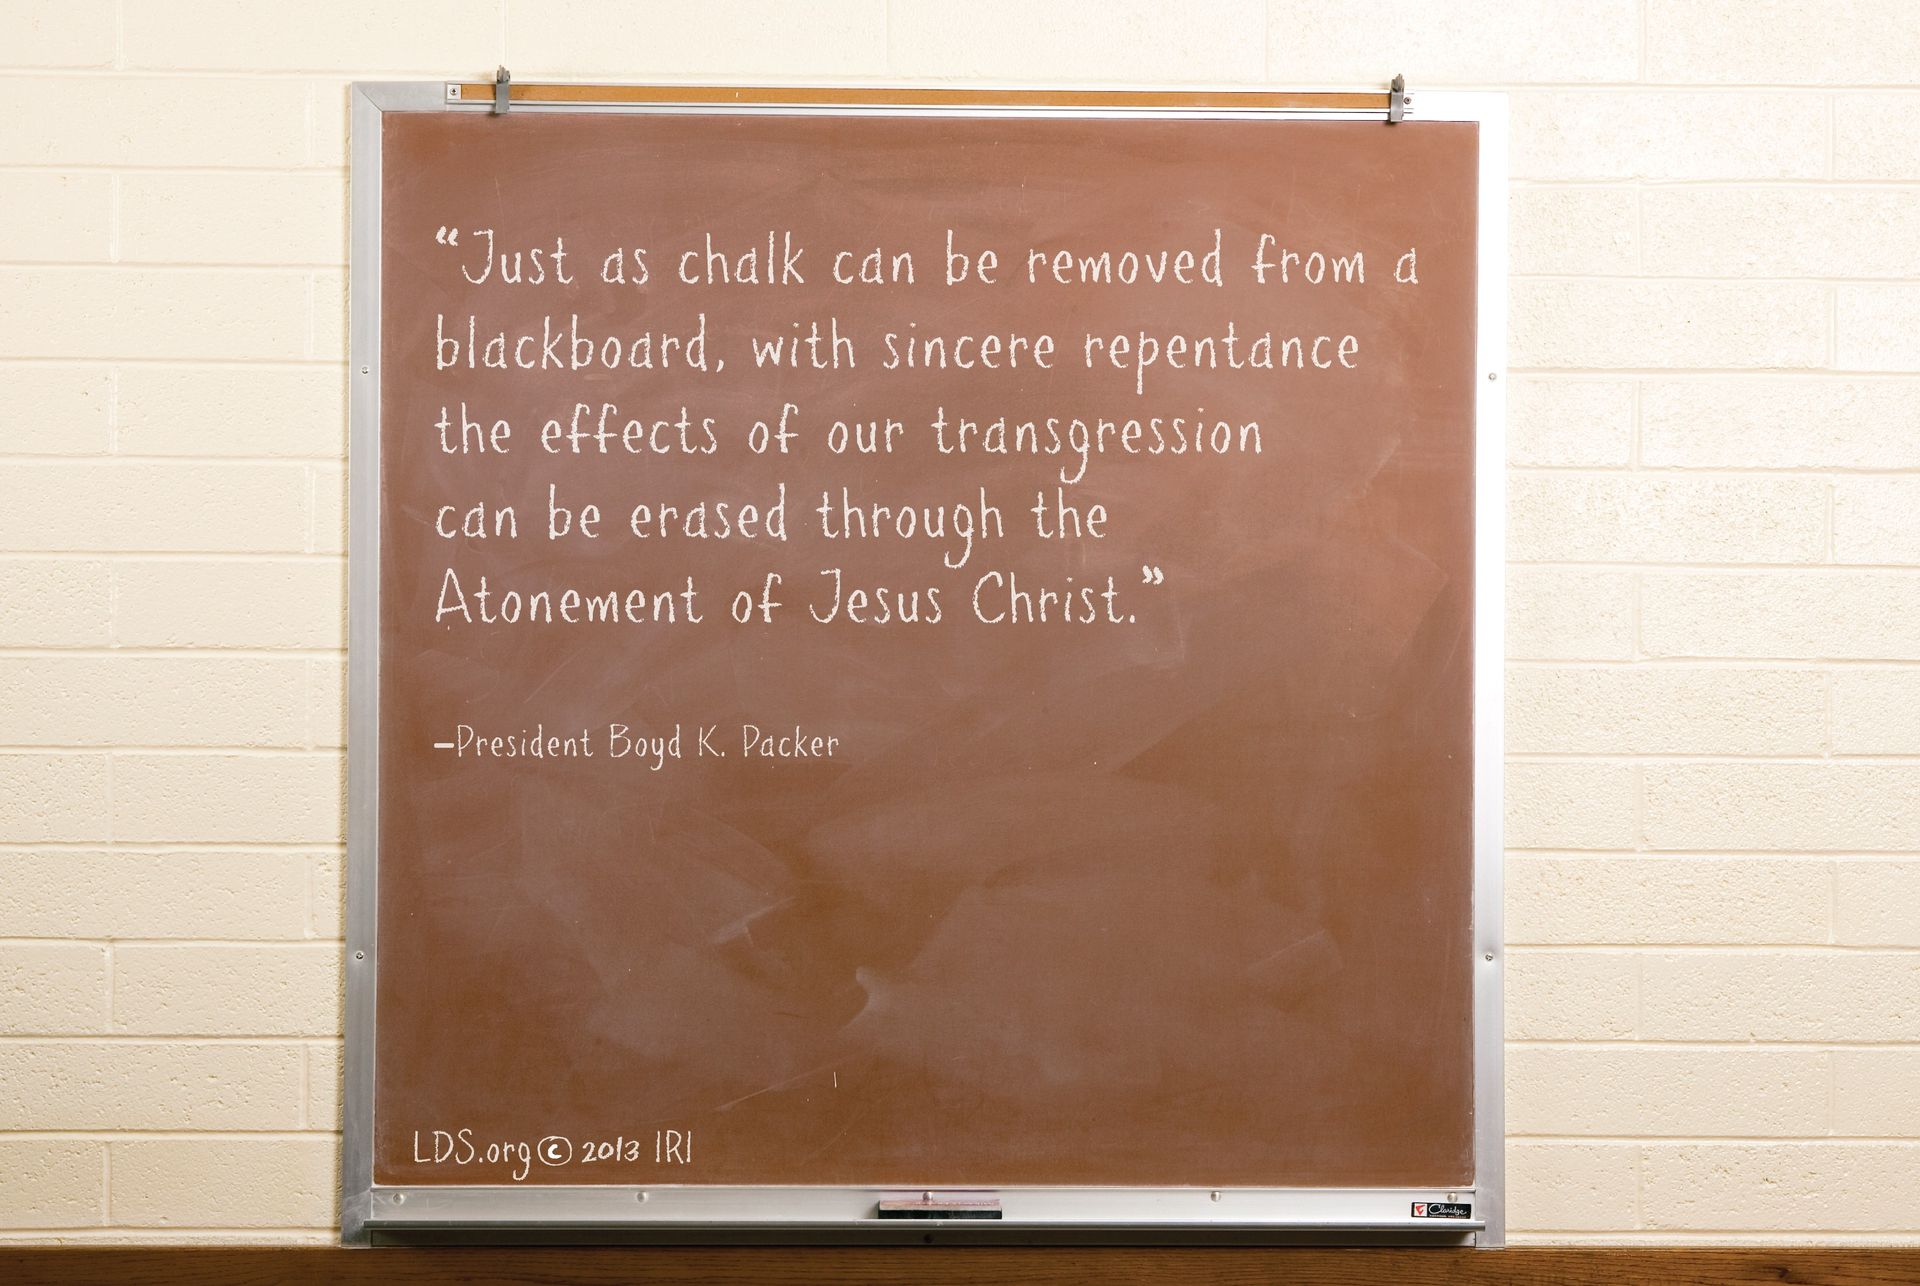 “Just as chalk can be removed from a blackboard, with sincere repentance the effects of our transgression can be erased through the Atonement of Jesus Christ.”—President Boyd K. Packer, “The Key to Spiritual Protection” © undefined ipCode 1.